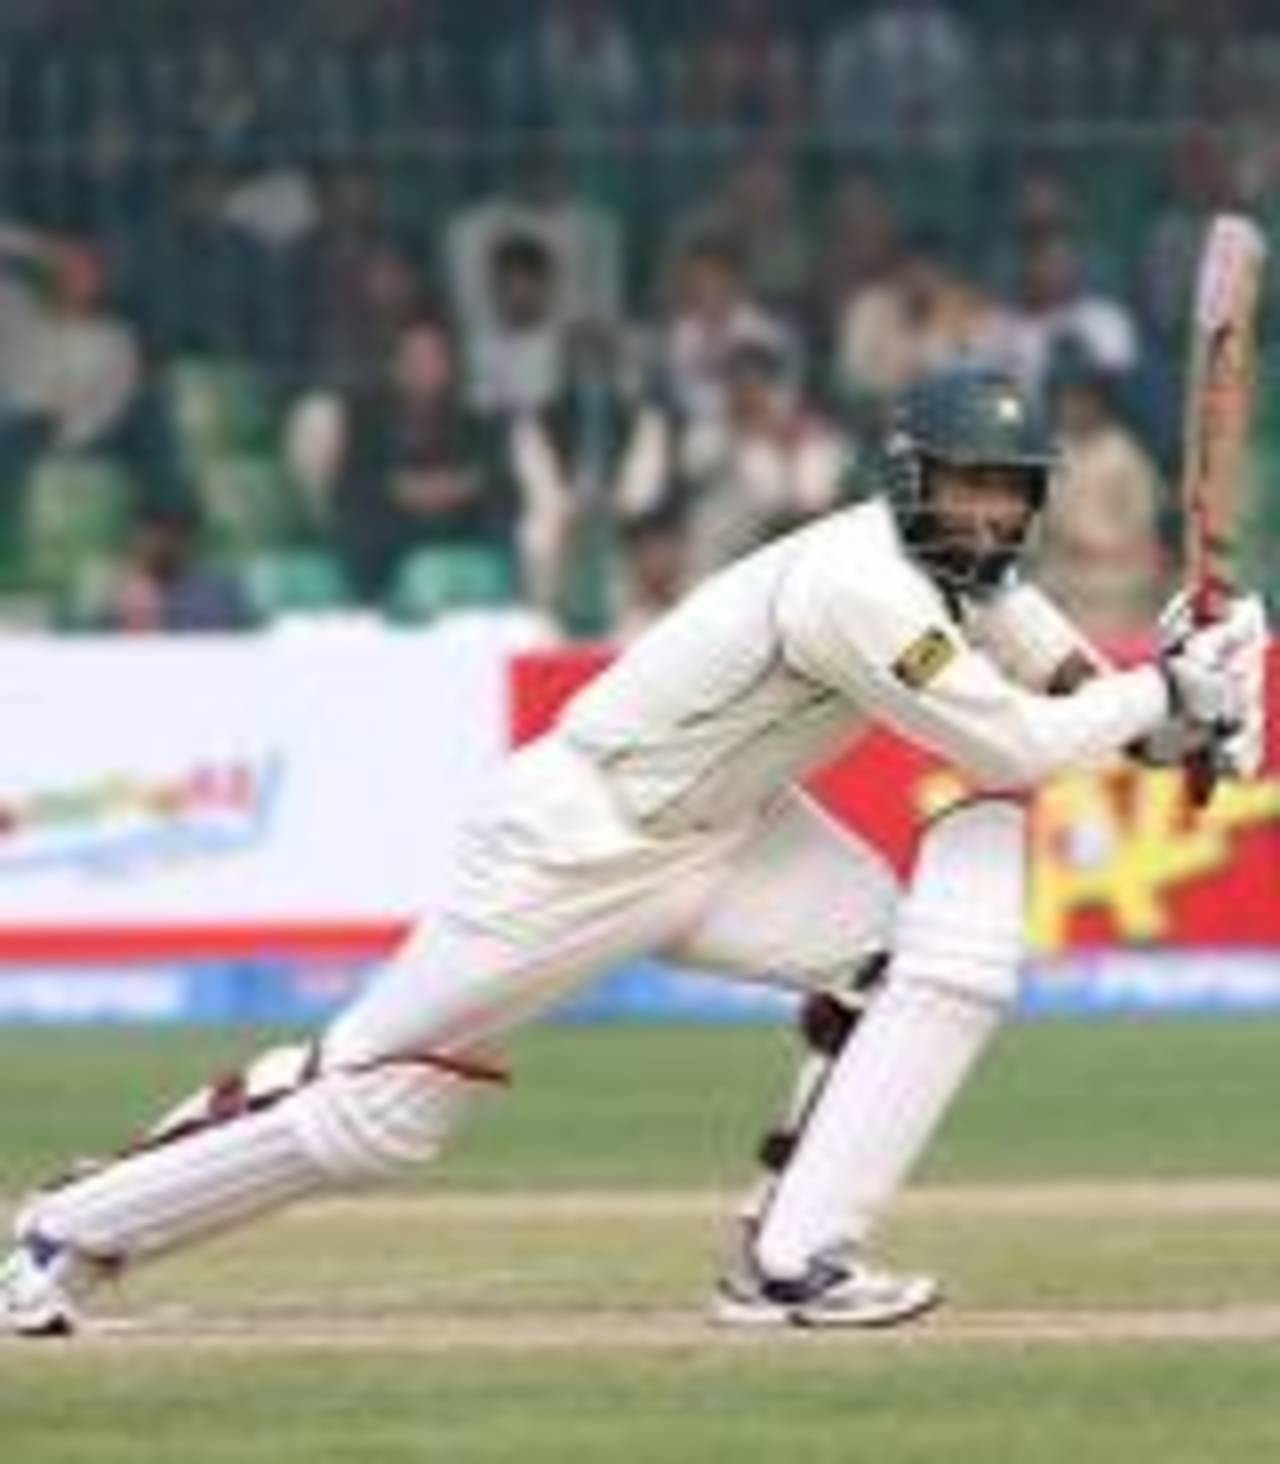 Mohammad Yousuf eases into a drive during his century, Pakistan v West Indies, 1st Test, Lahore, 2nd day, November 12, 2006